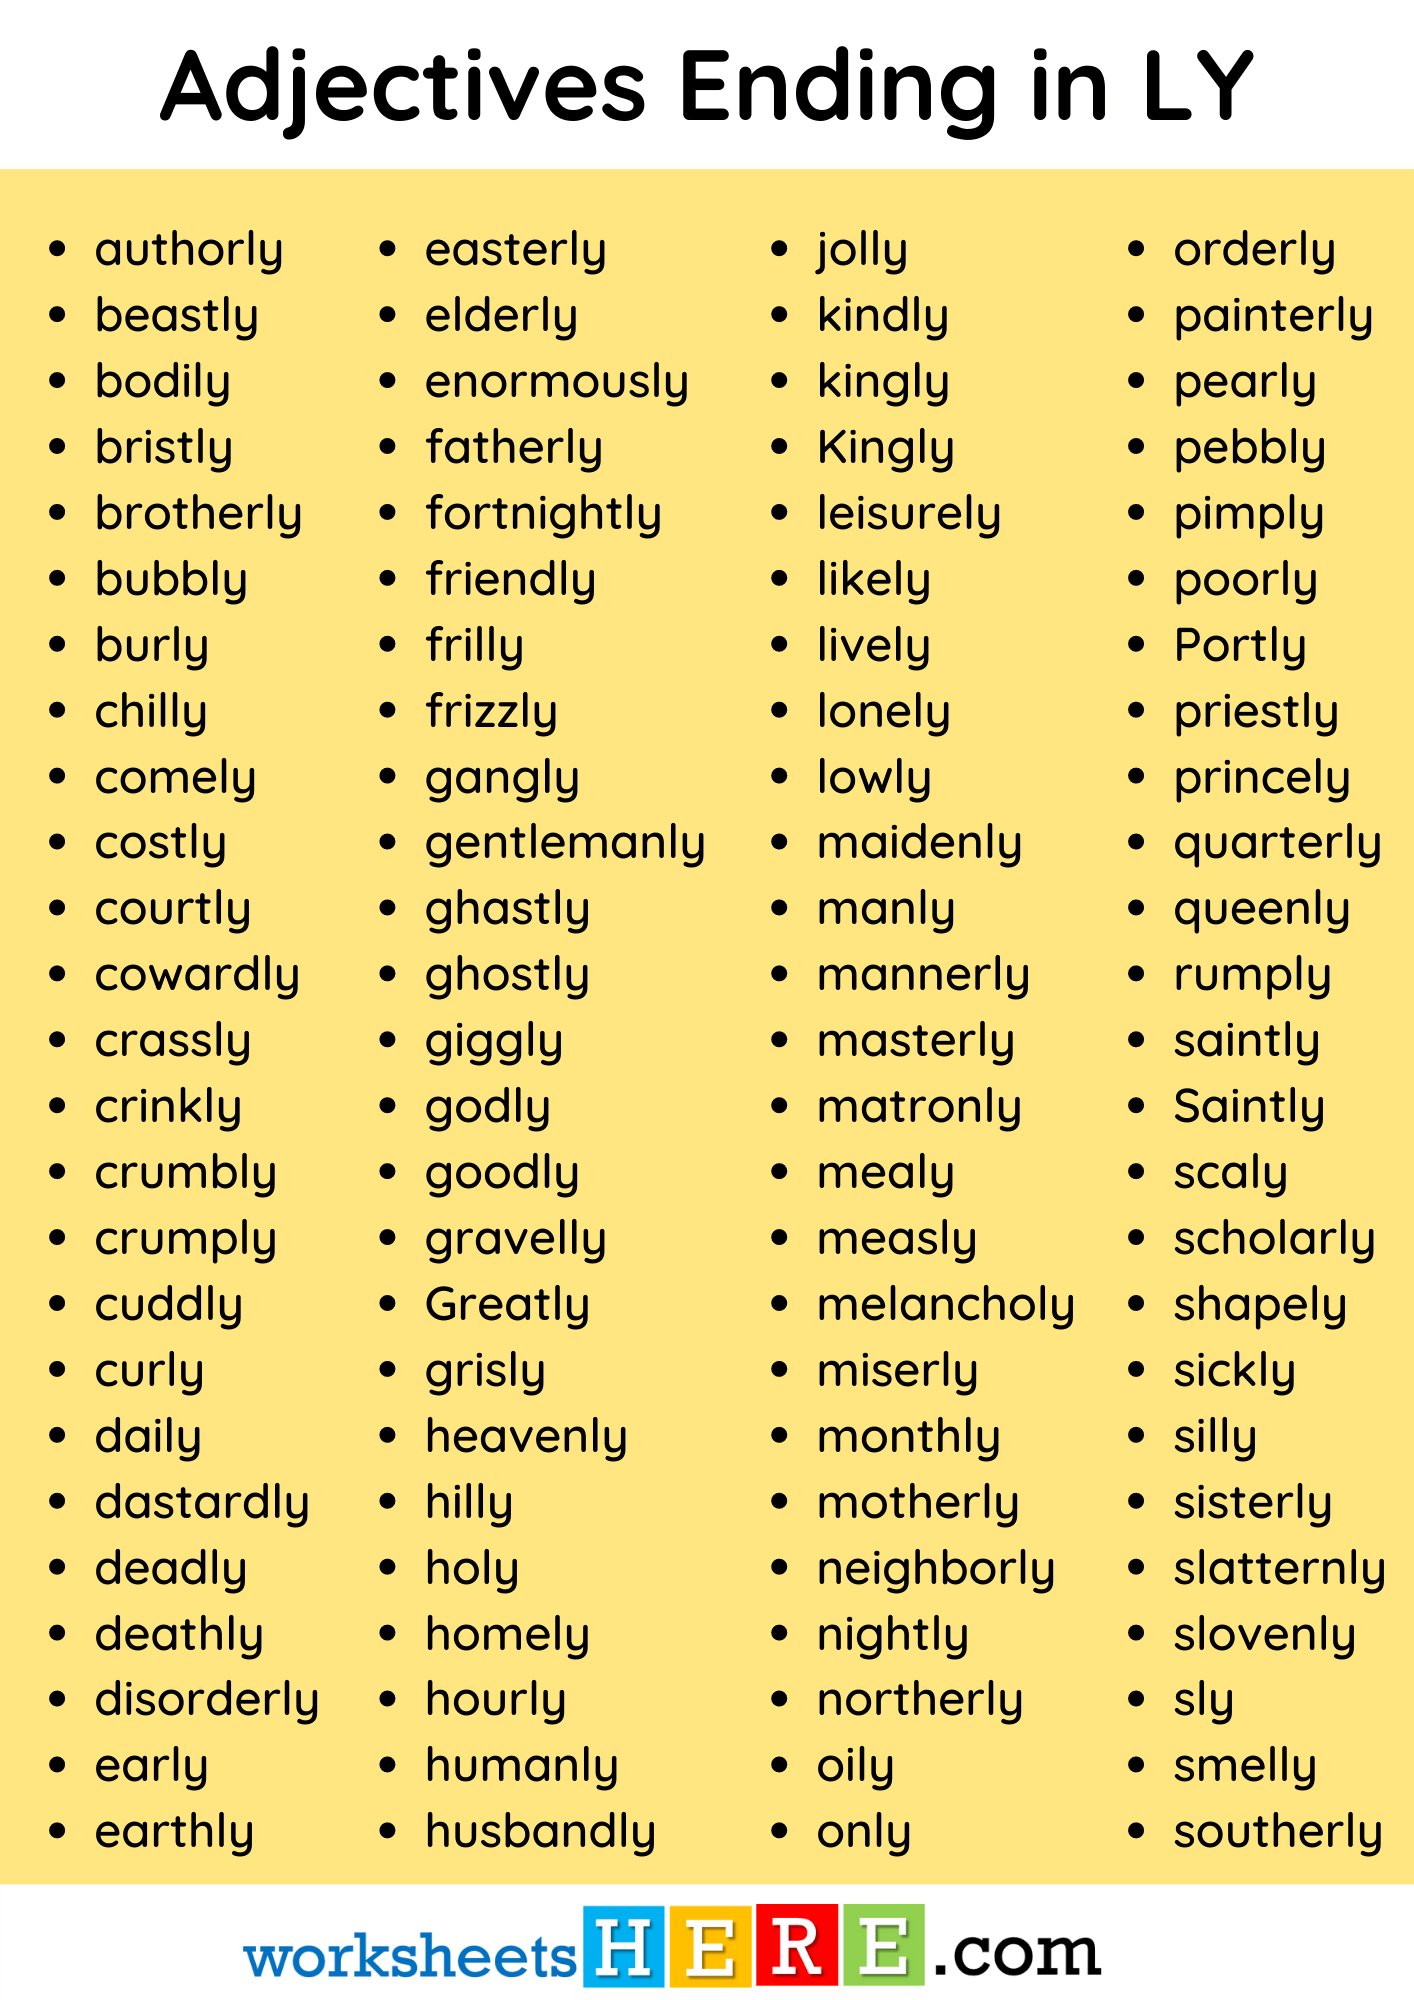 Adjectives Words List Ending in LY PDF Worksheet For Students